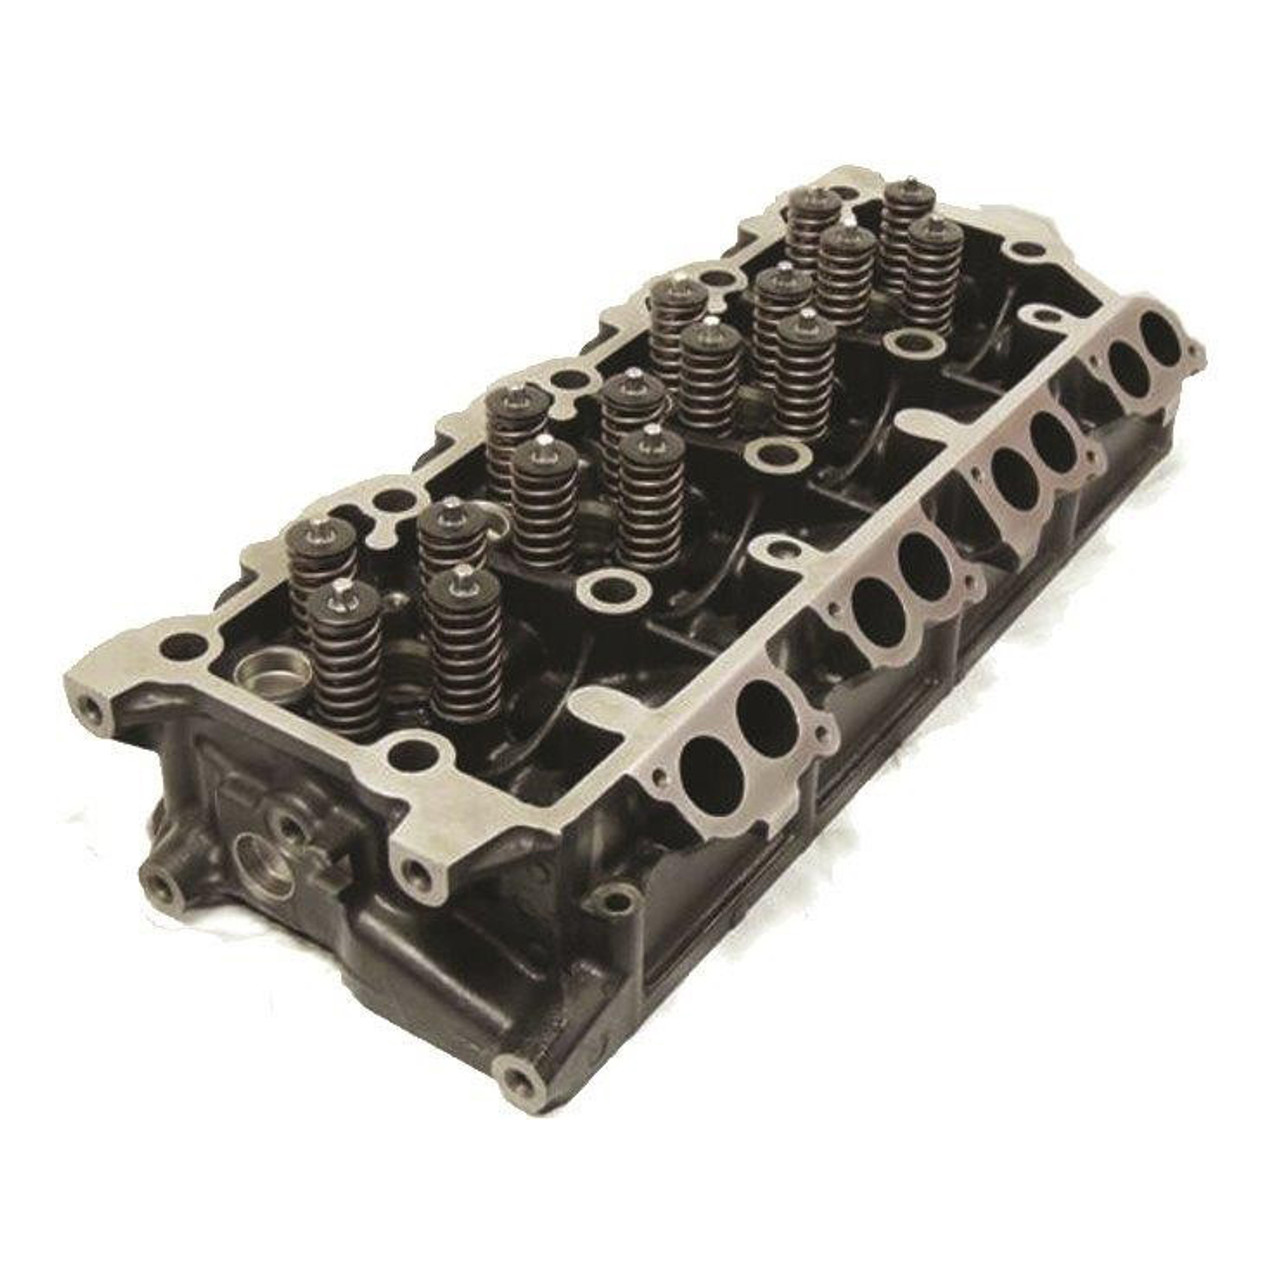 PROMAXX FOR85XNB BARE REPLACEMENT CYLINDER HEAD 2003-2007 FORD 6.0L POWERSTROKE